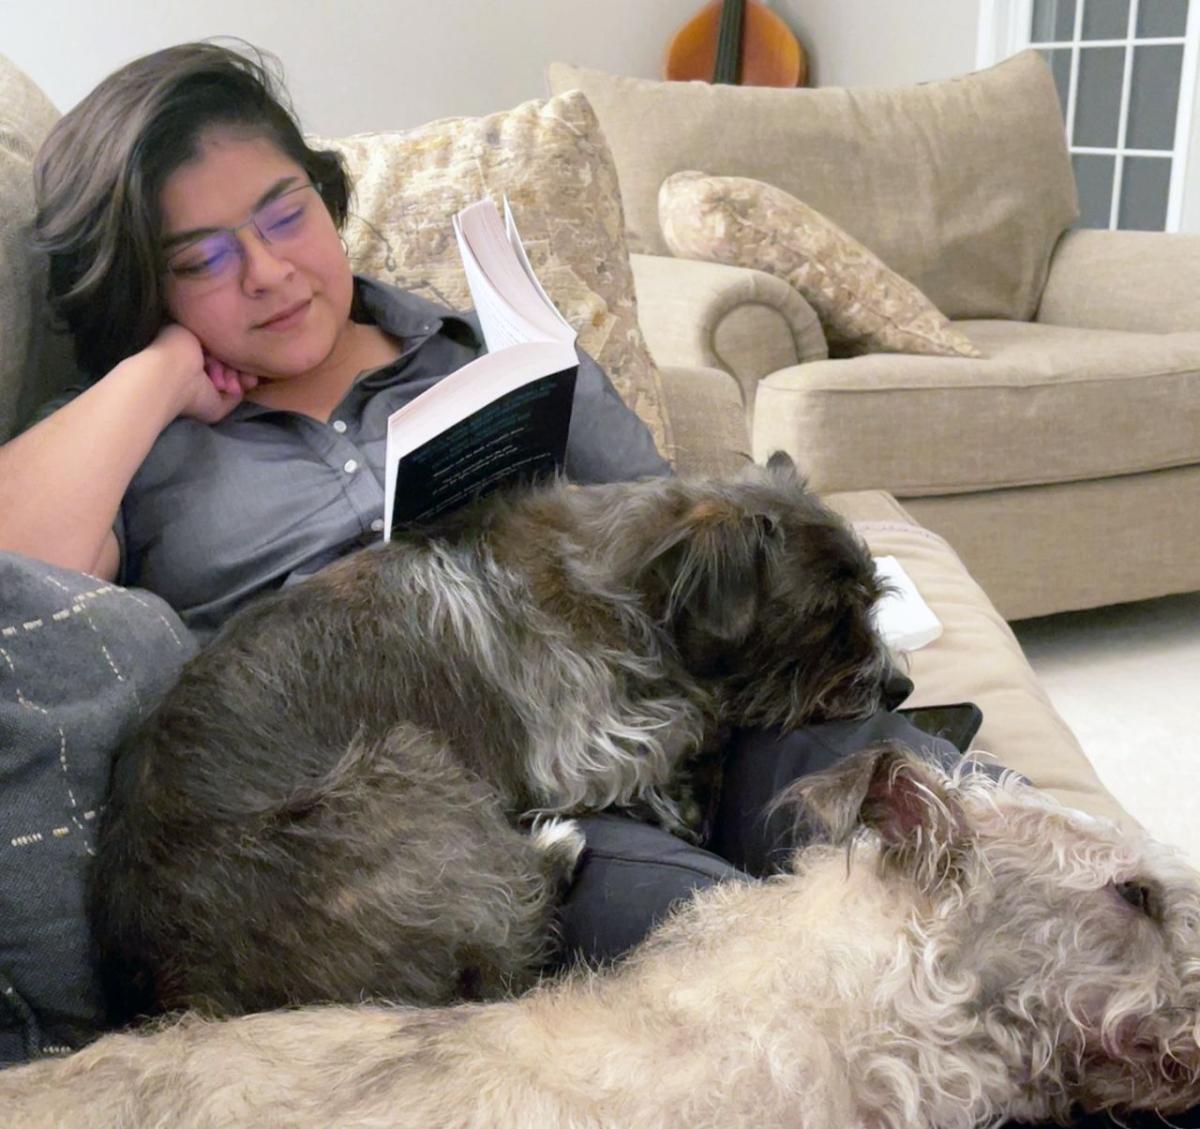 Denisse De la Cruz reading on a couch with two dogs curled up next to her